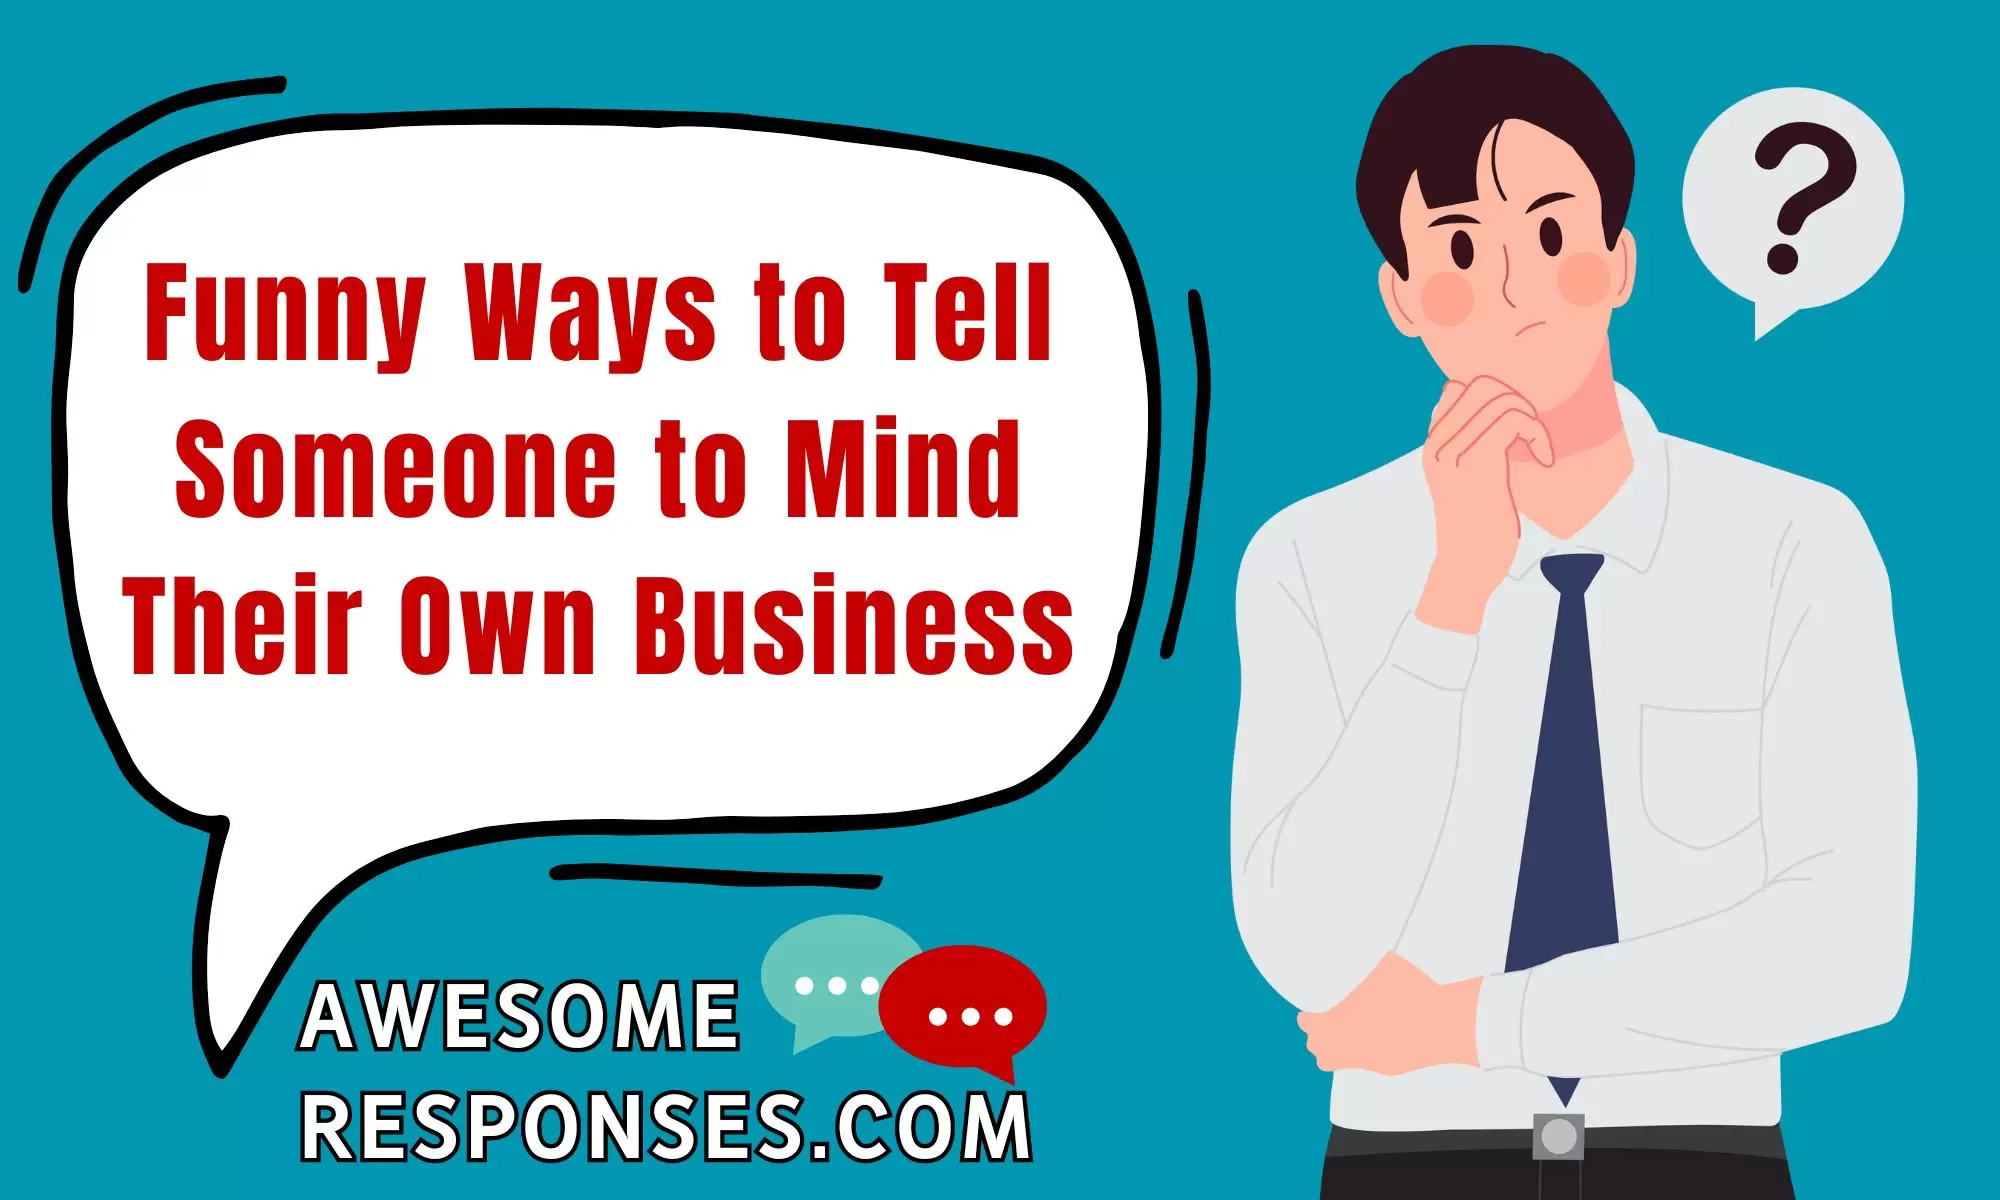 Funny Ways to Tell Someone to Mind Their Own Business